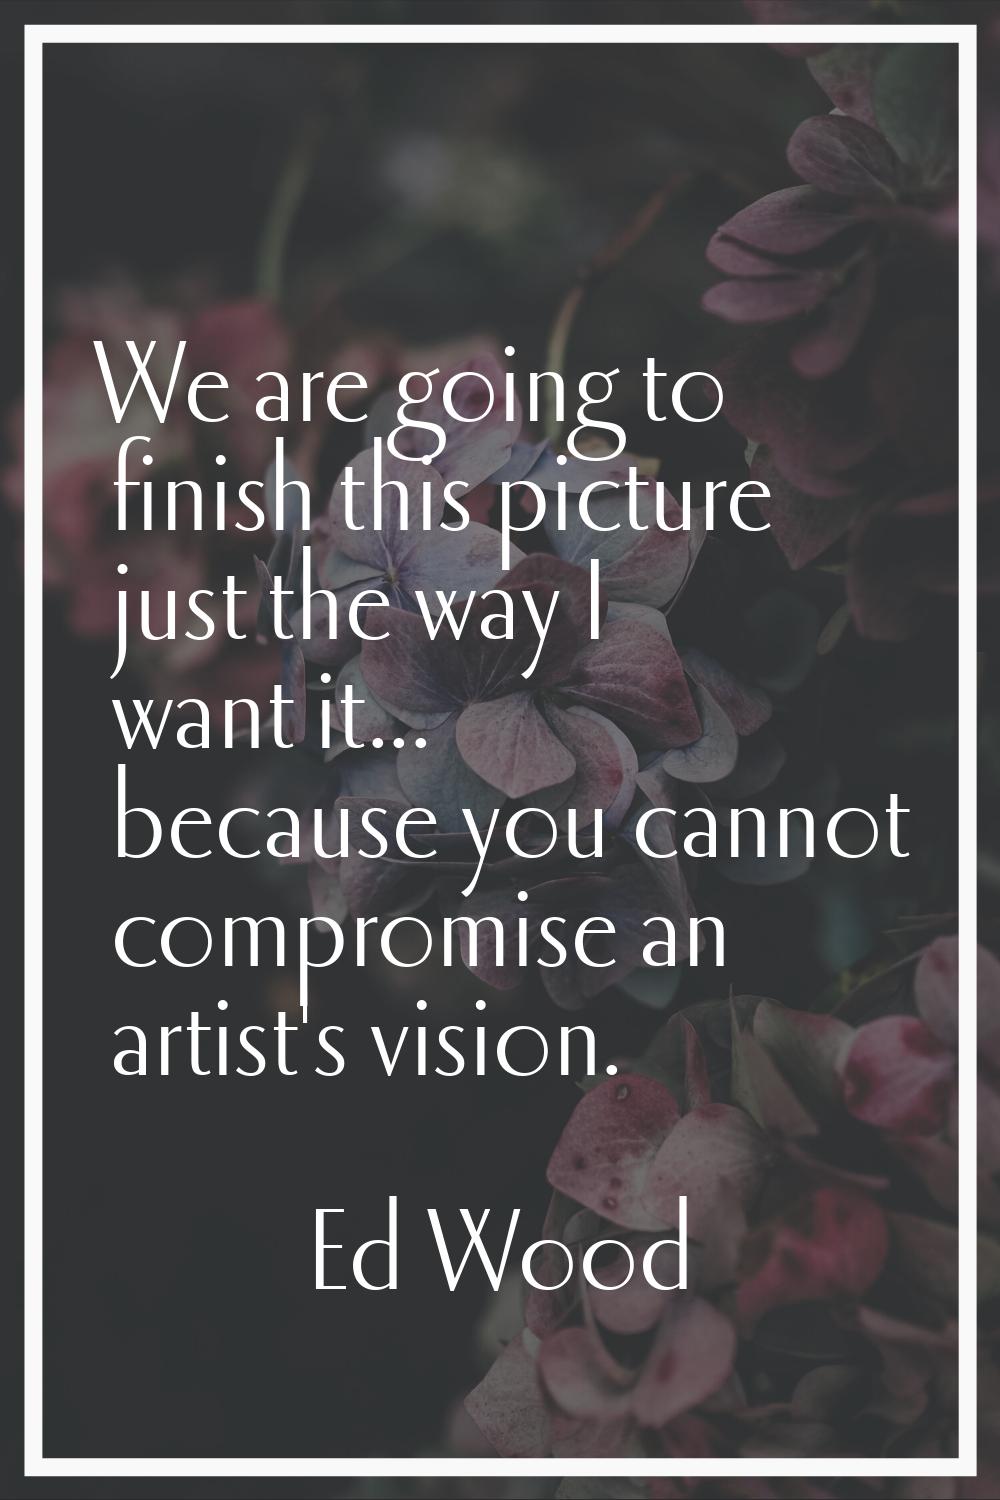 We are going to finish this picture just the way I want it... because you cannot compromise an arti